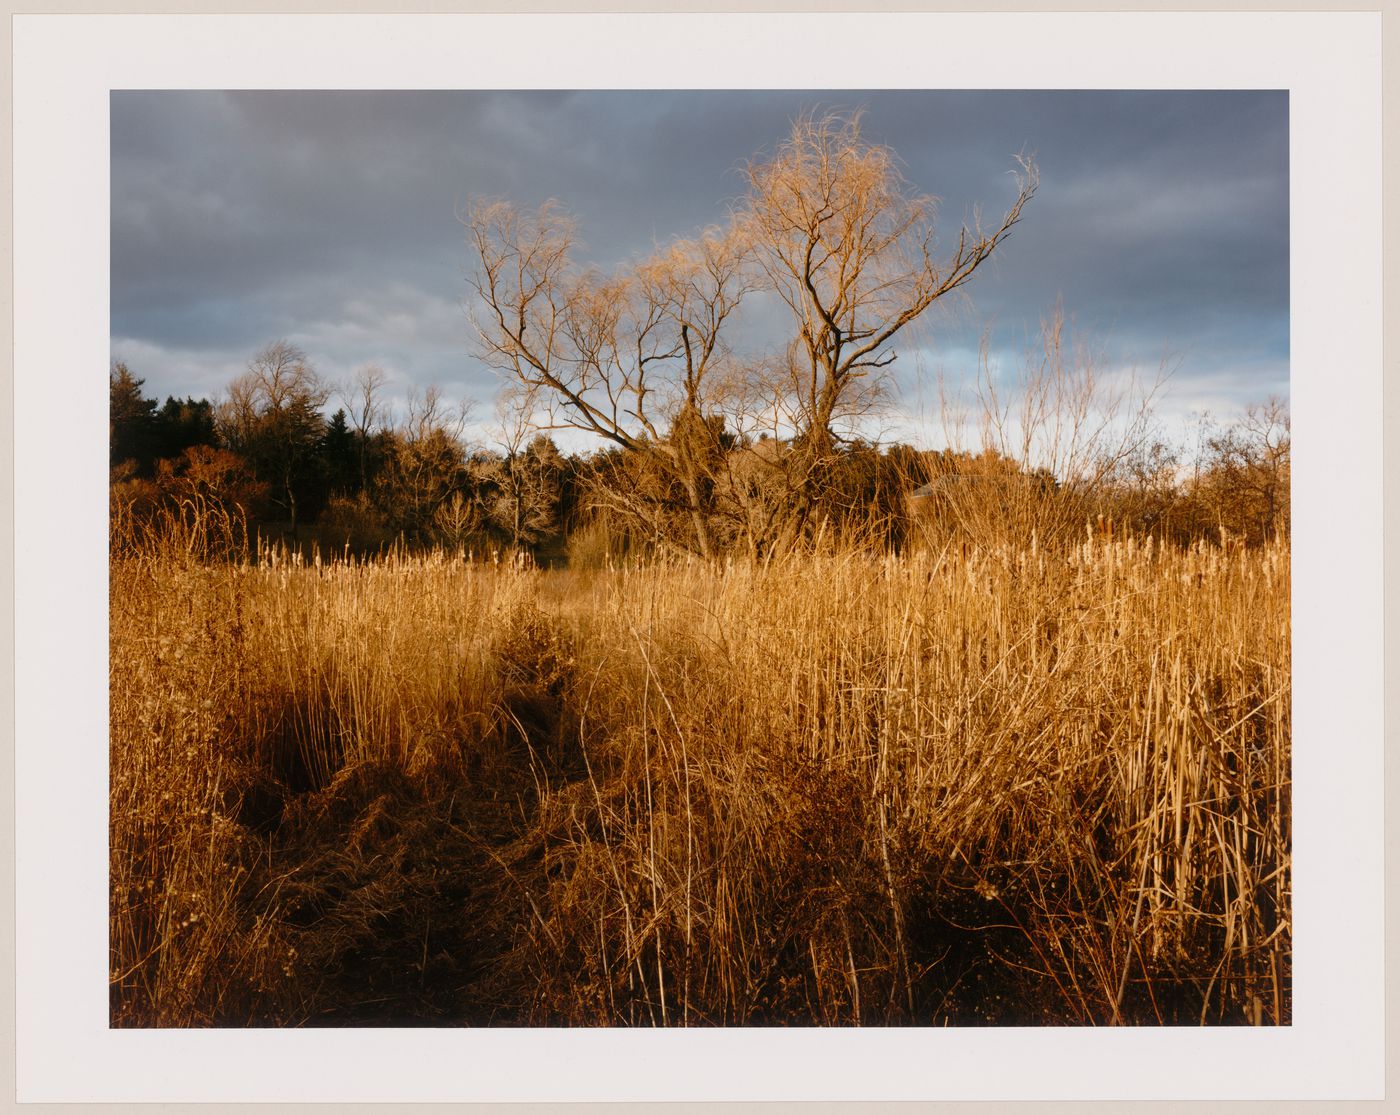 Viewing Olmsted: View of Marsh, Arnold Arboretum, Boston, Massachusetts